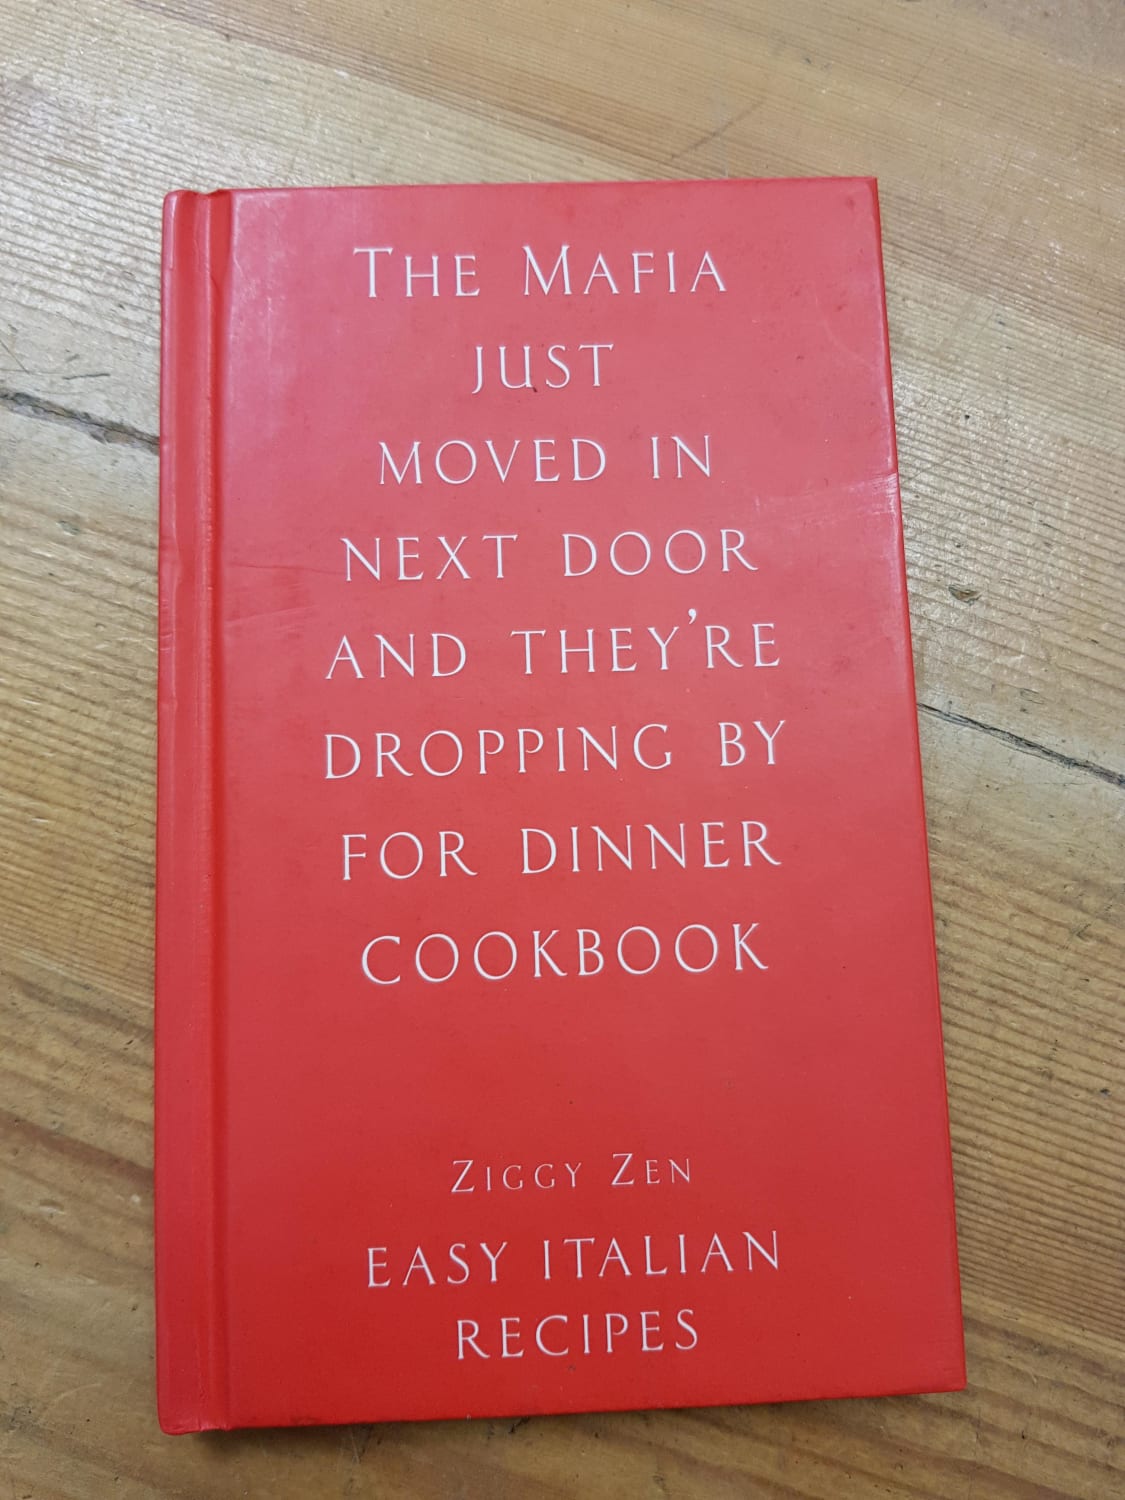 This cookbook I found in a charity shop.